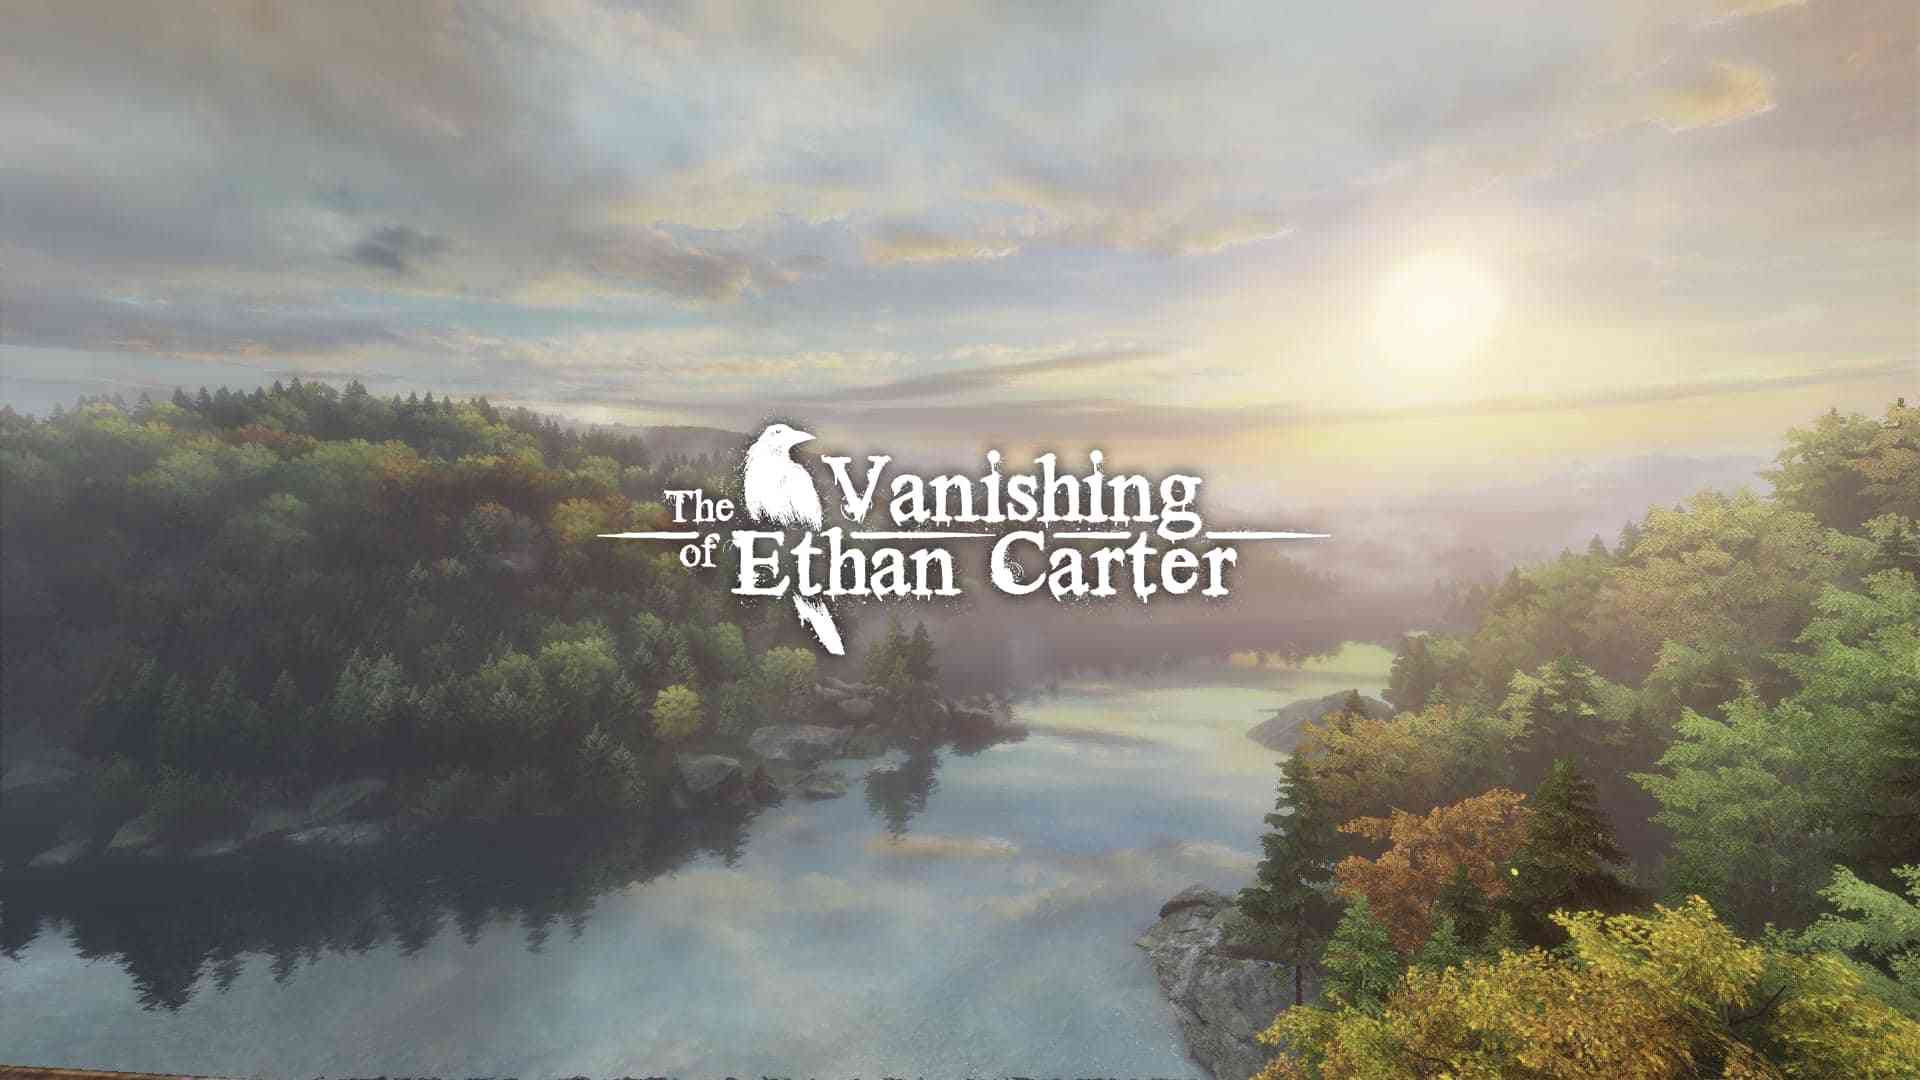 The Vanishing of Ethan Carter - Official Website